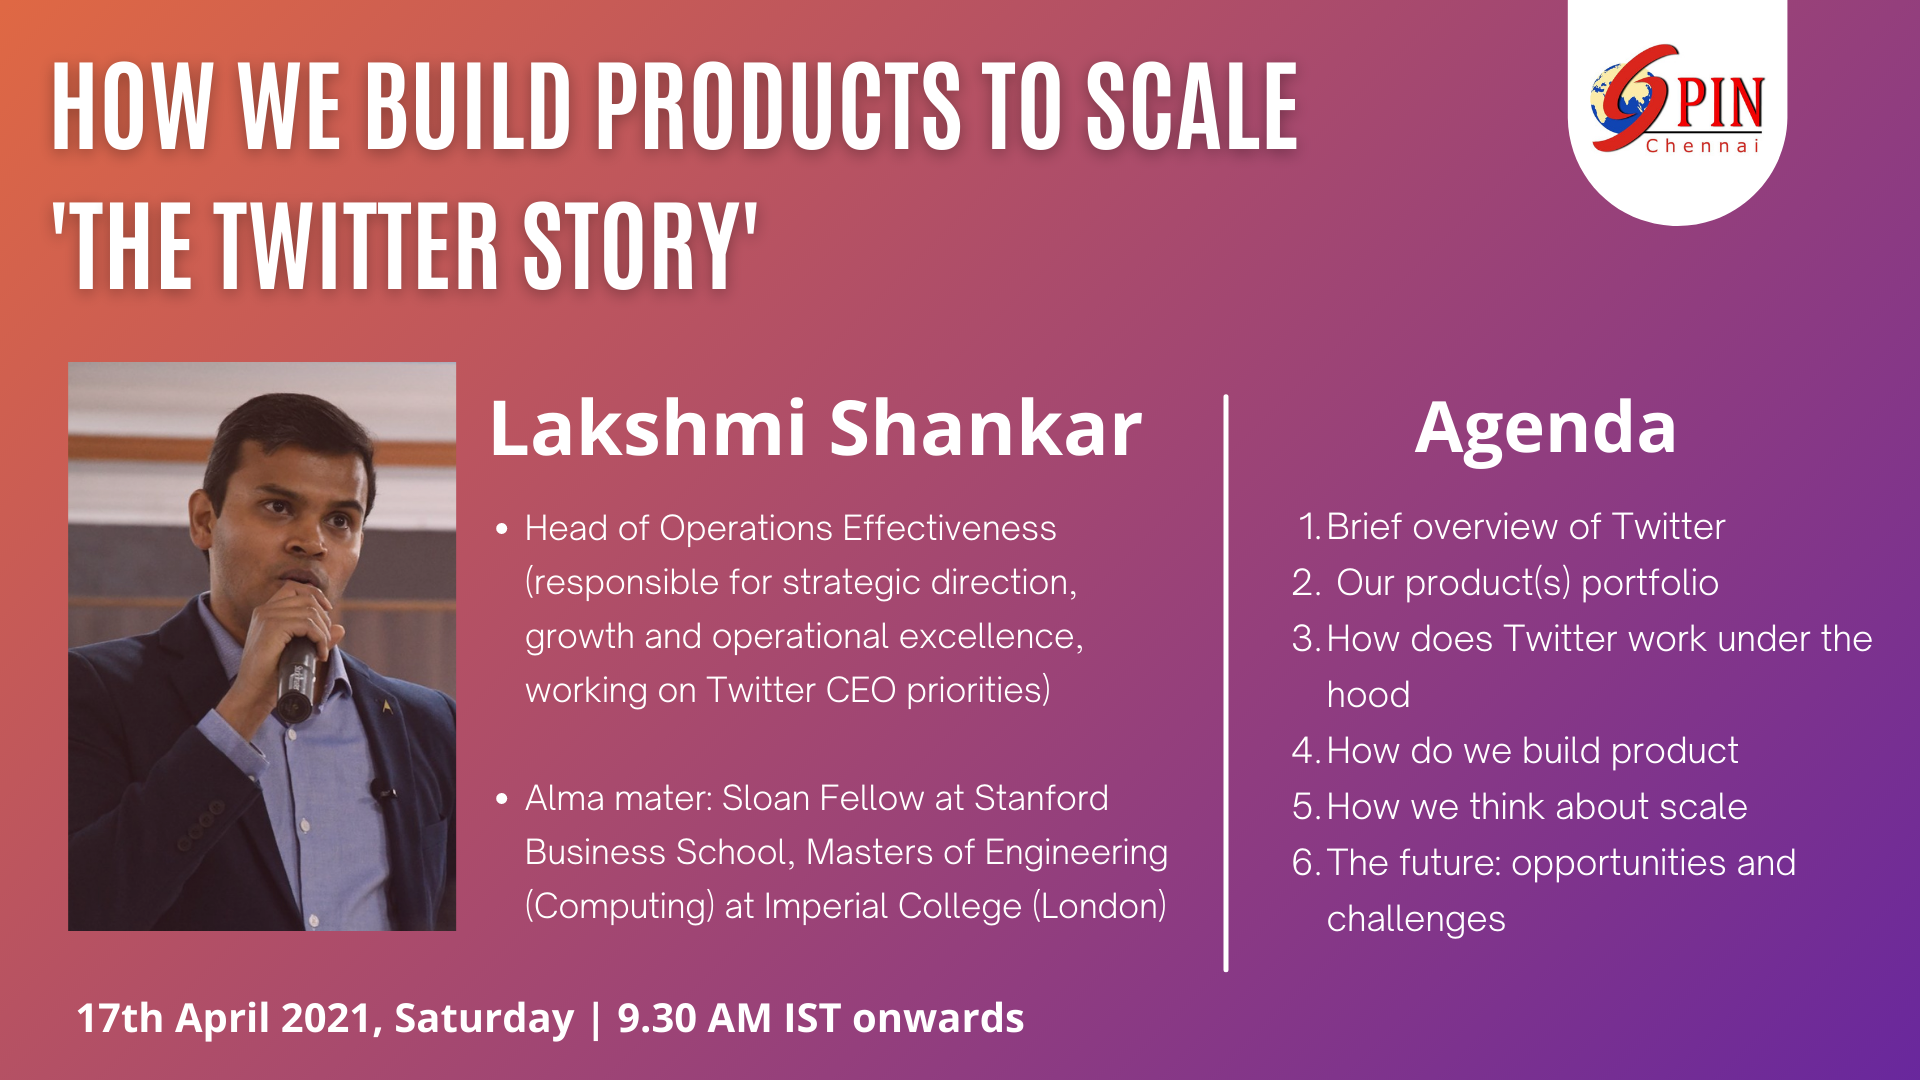 The twitter story - how we build products to scale